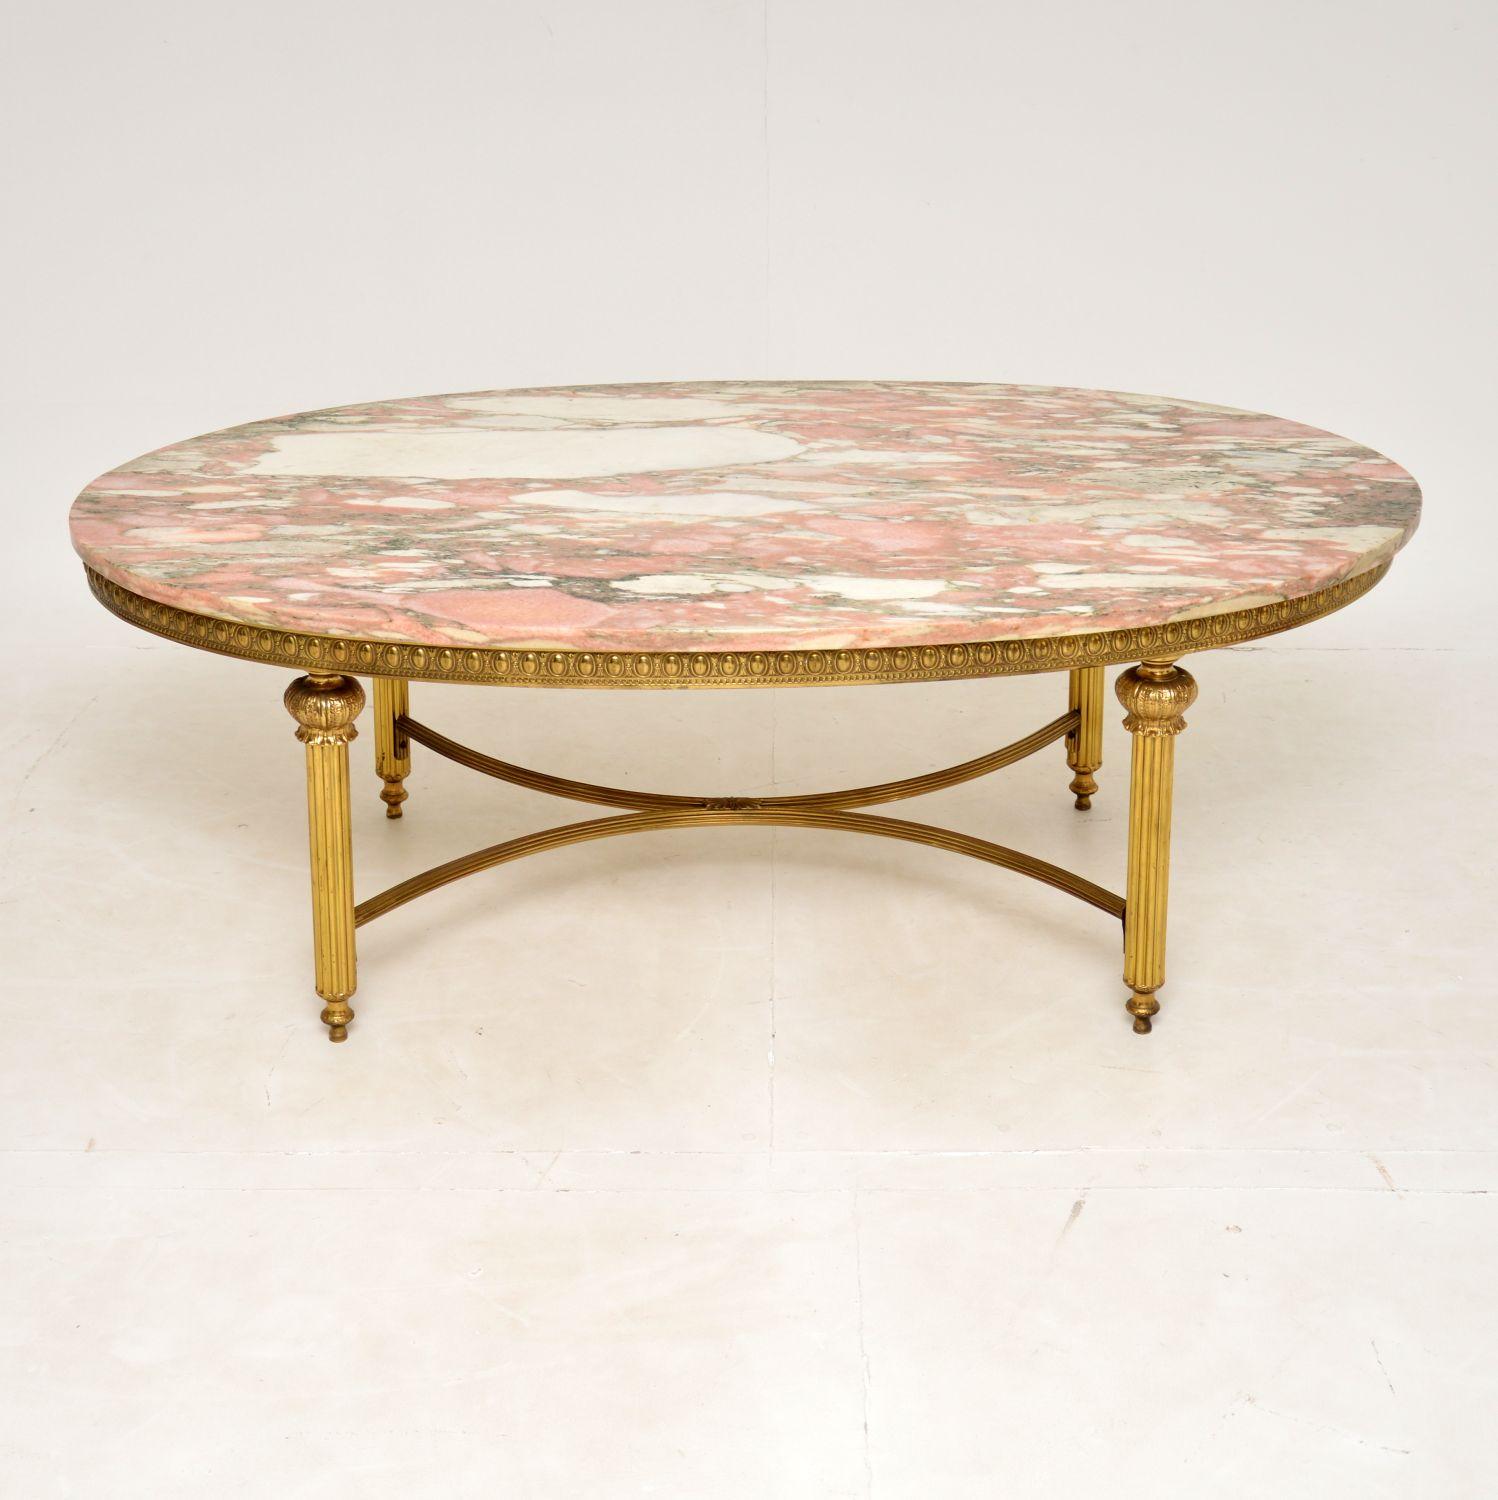 A very large and extremely impressive French style coffee table in solid brass and marble, dating from around the 1950’s period.
The quality is superb and the marble top is absolutely gorgeous. There are stunning colours and patterns, this is a